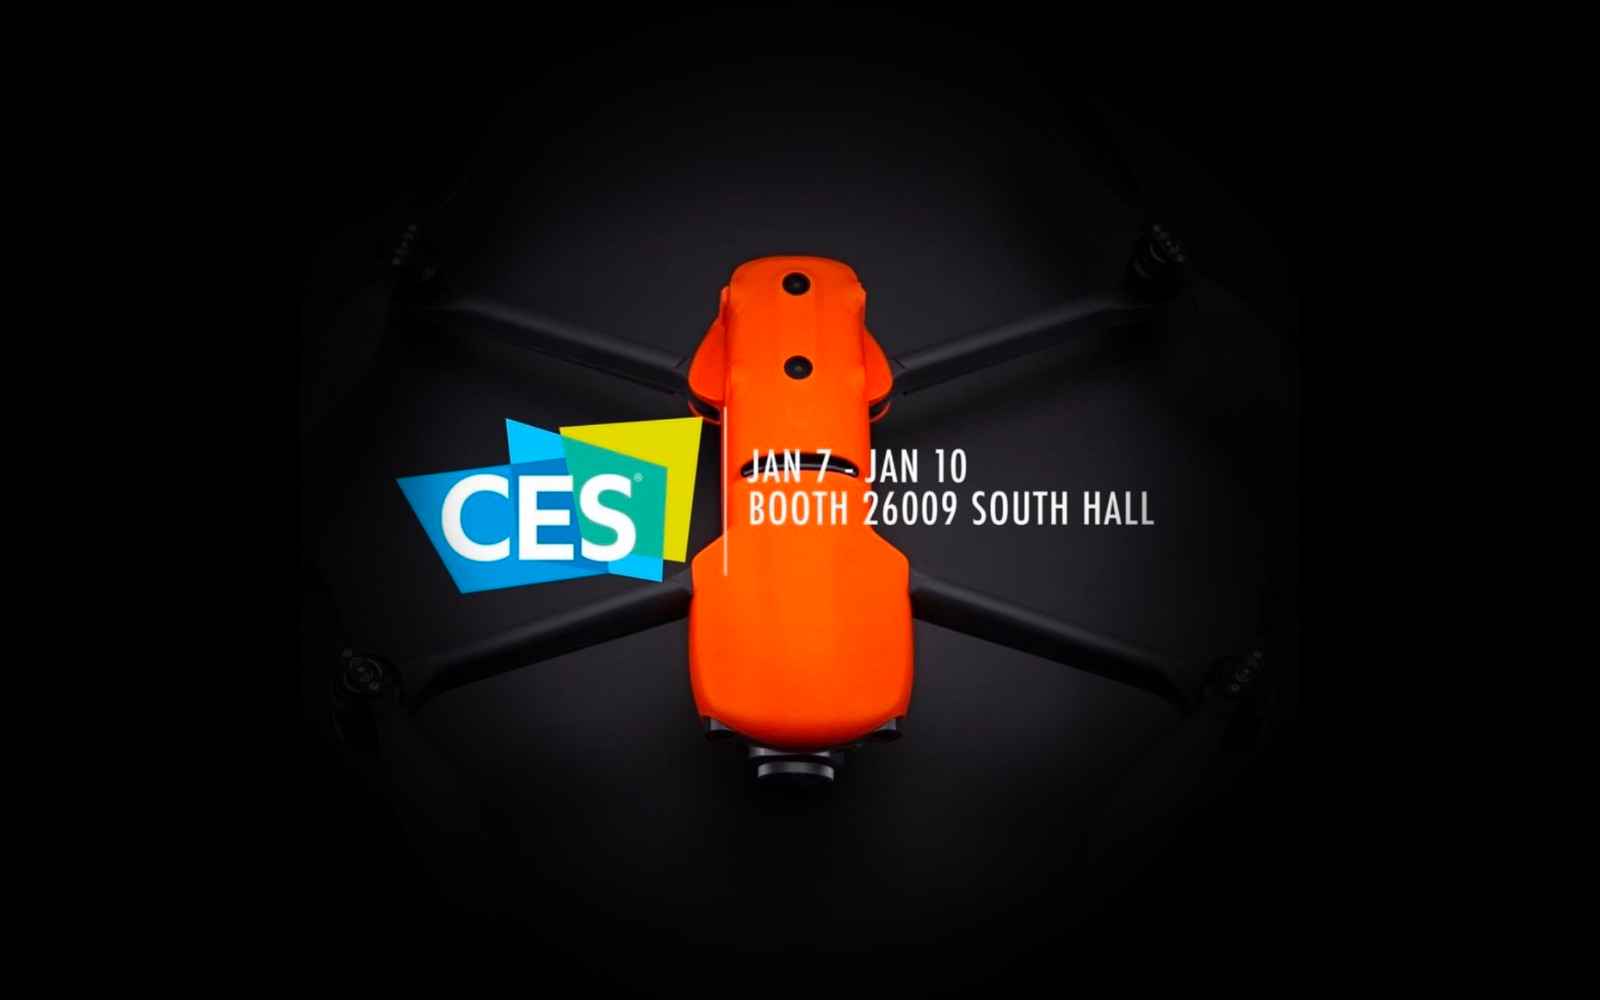 Autel Robotics will be at CES after all. Possibly to unveil new Autel Evo 2?